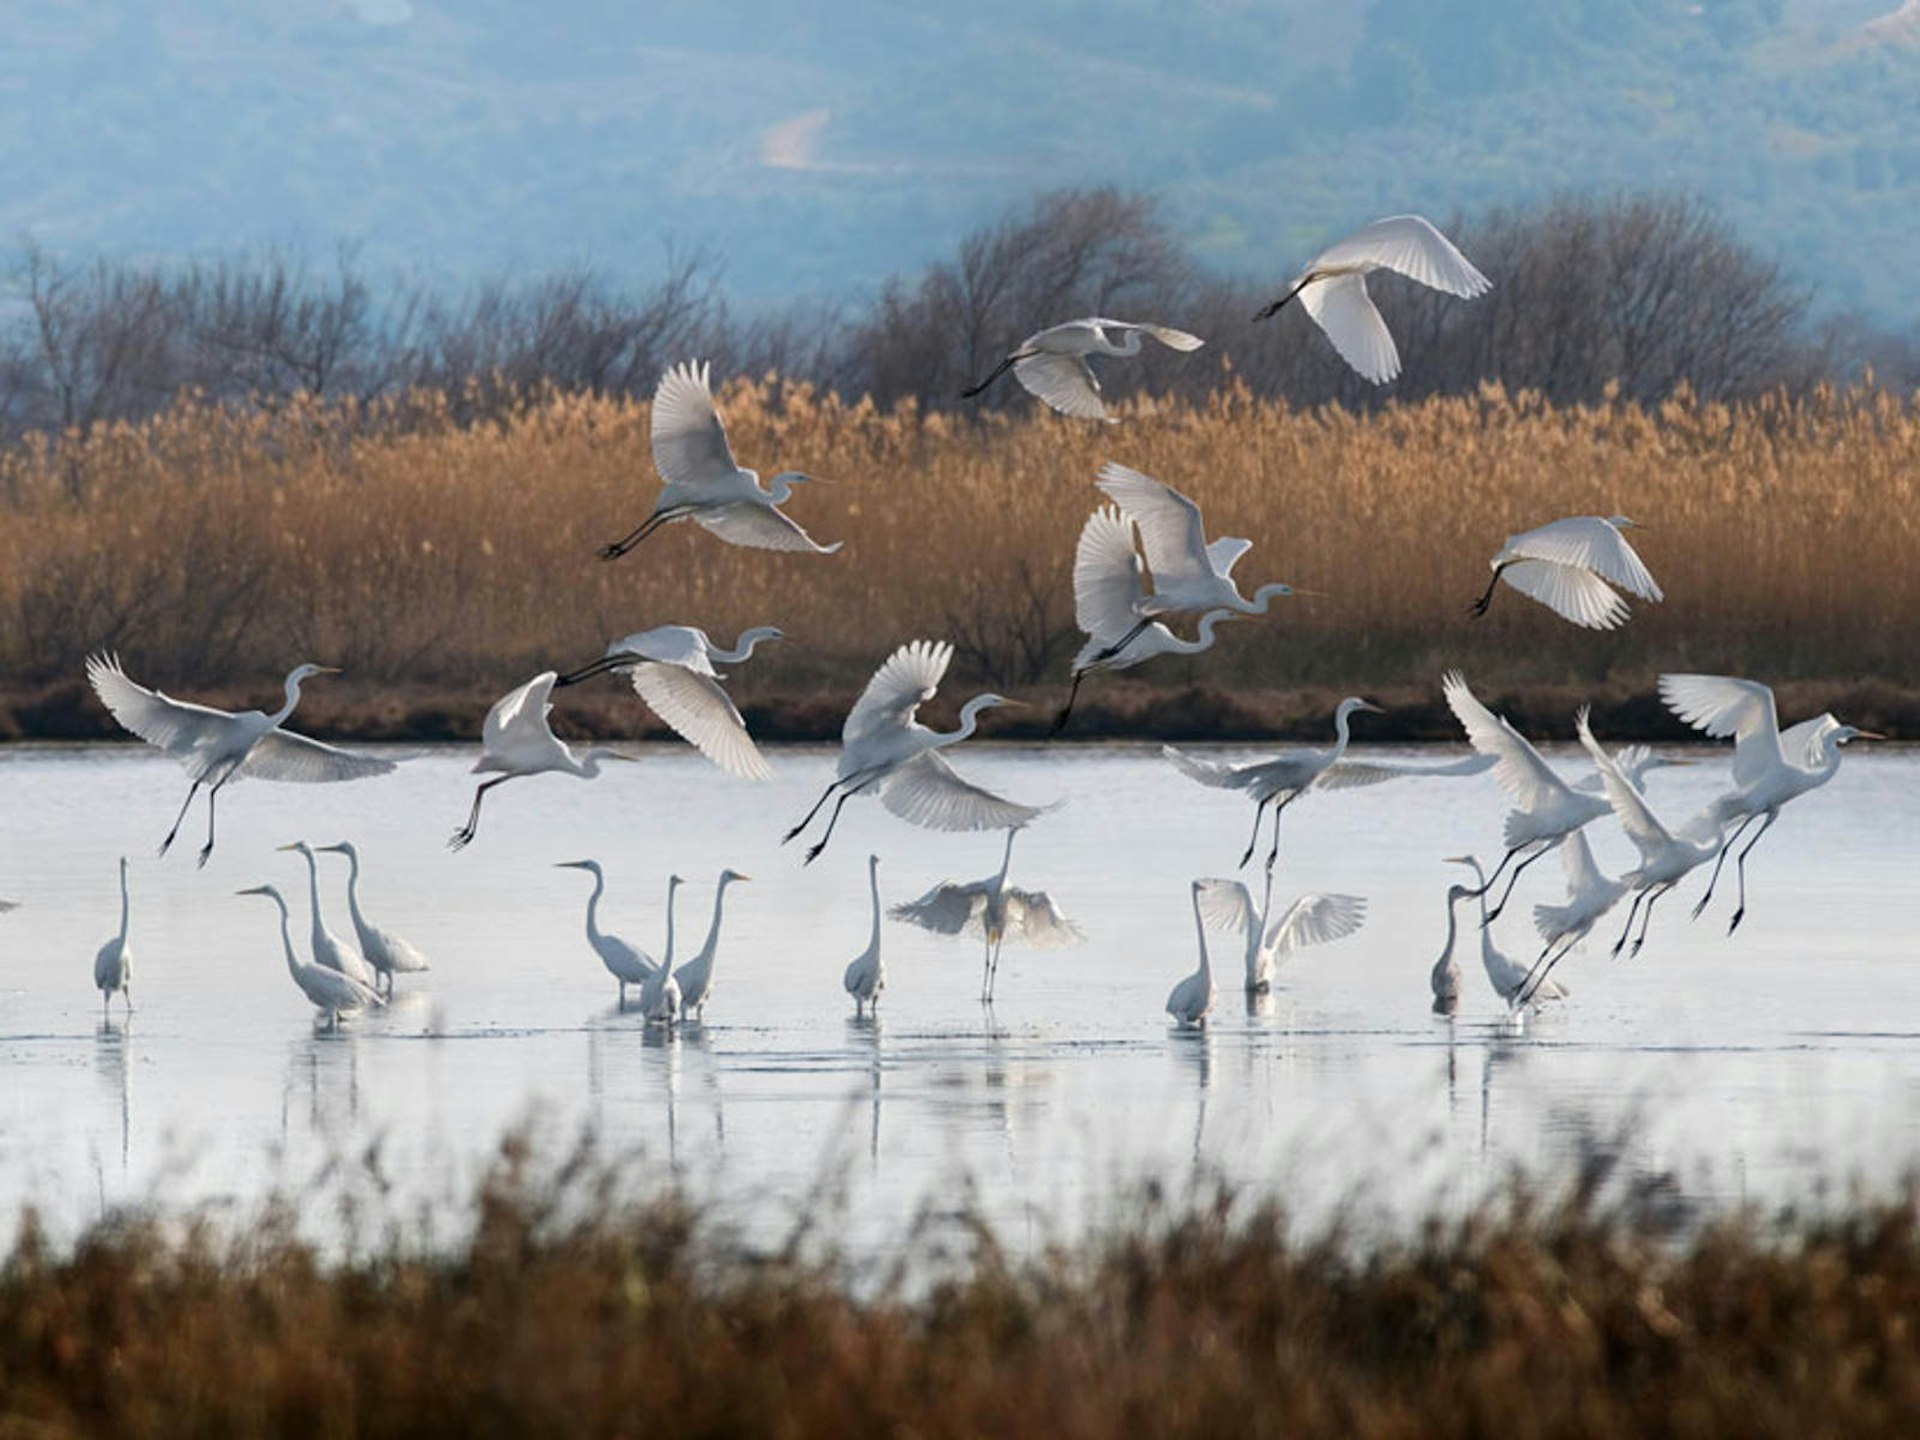 A flock of birds in the Messinia region of the Peloponnese @ courtesy of costanavarino.com